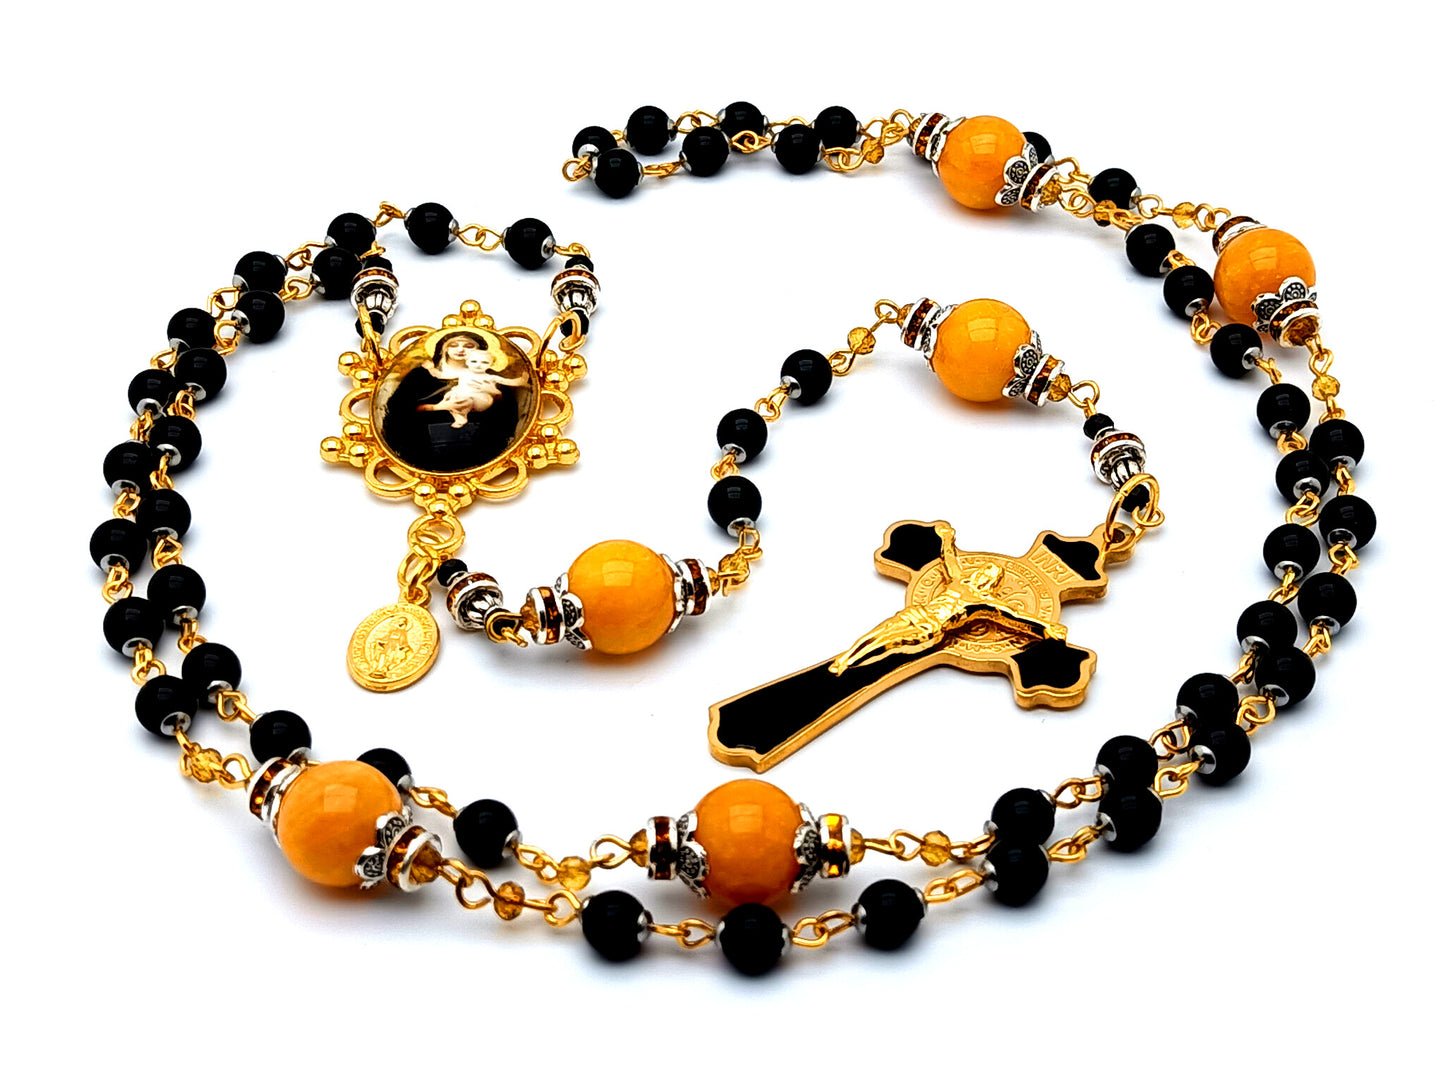 Madonna and Child Jesus unique rosary beads with onyx and jade gemstone beads and Saint Benedict gold plated black enamel stainless steel crucifix.